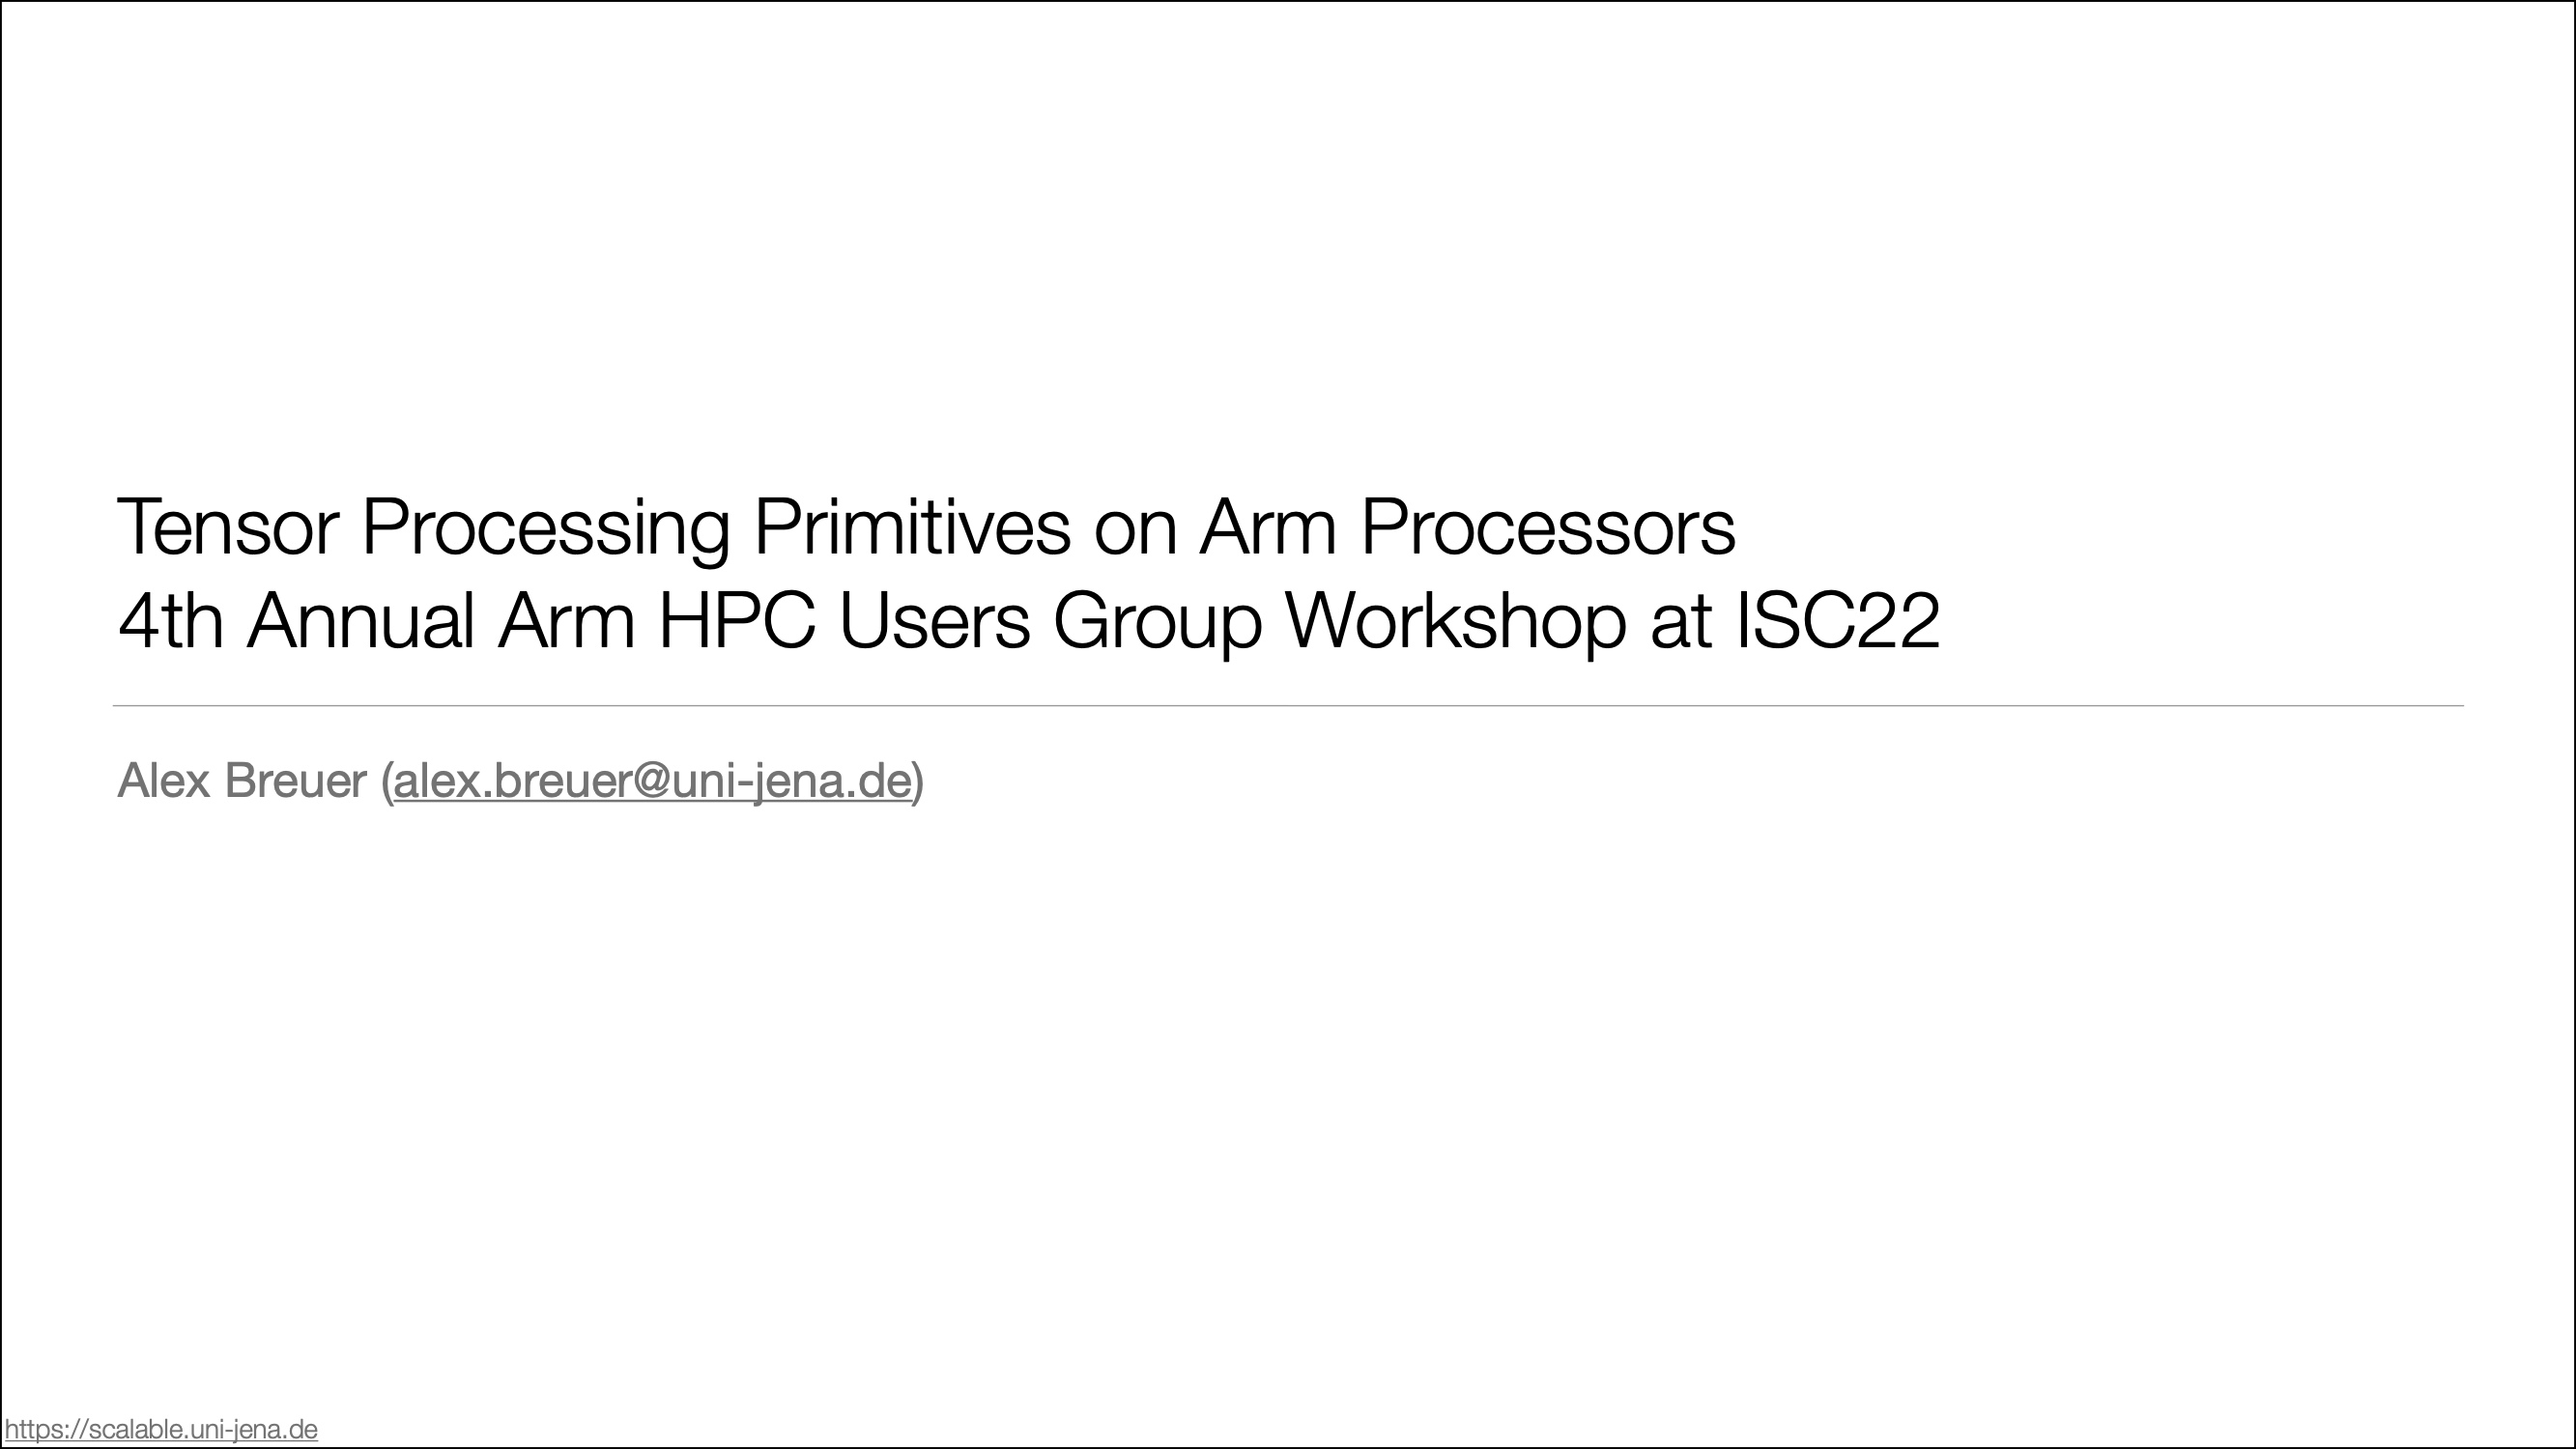 Slides of the presentation Tensor Processing Primitives on Arm Processors at ISC22.